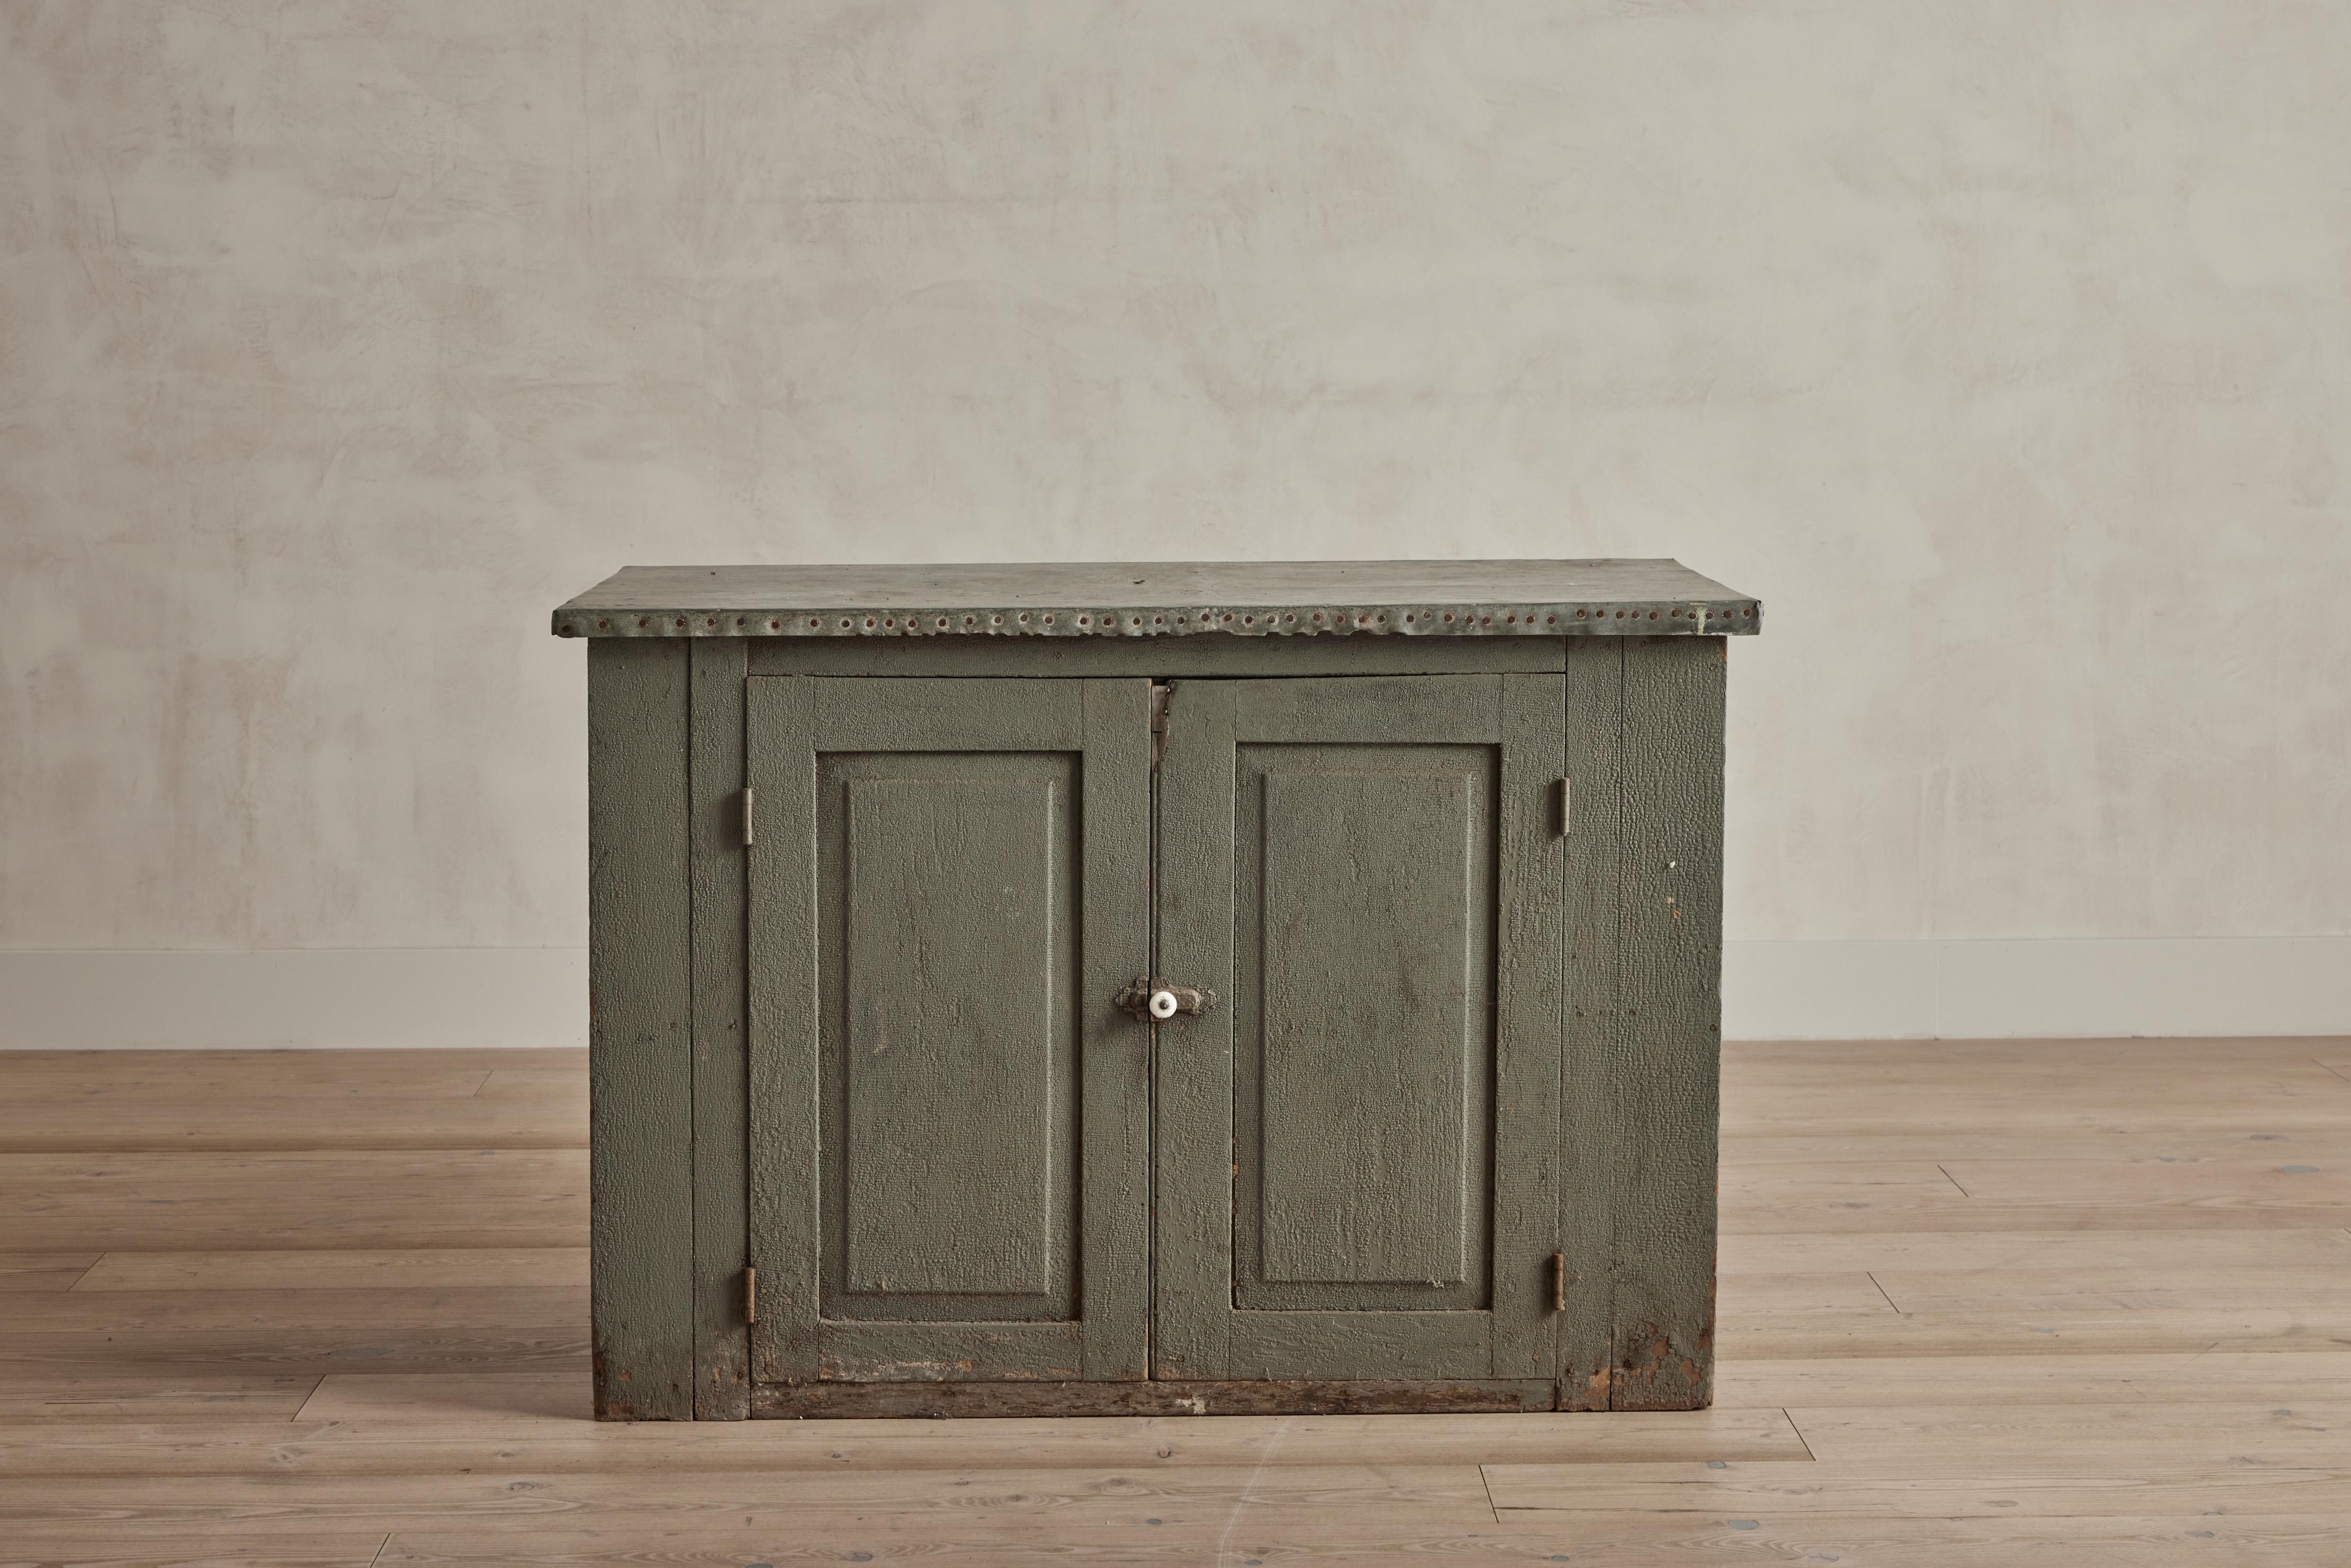 Gray painted two door cabinet with rustic zinc metal door. Visible wear throughout that is consistent with age and use. United States circa 1900.